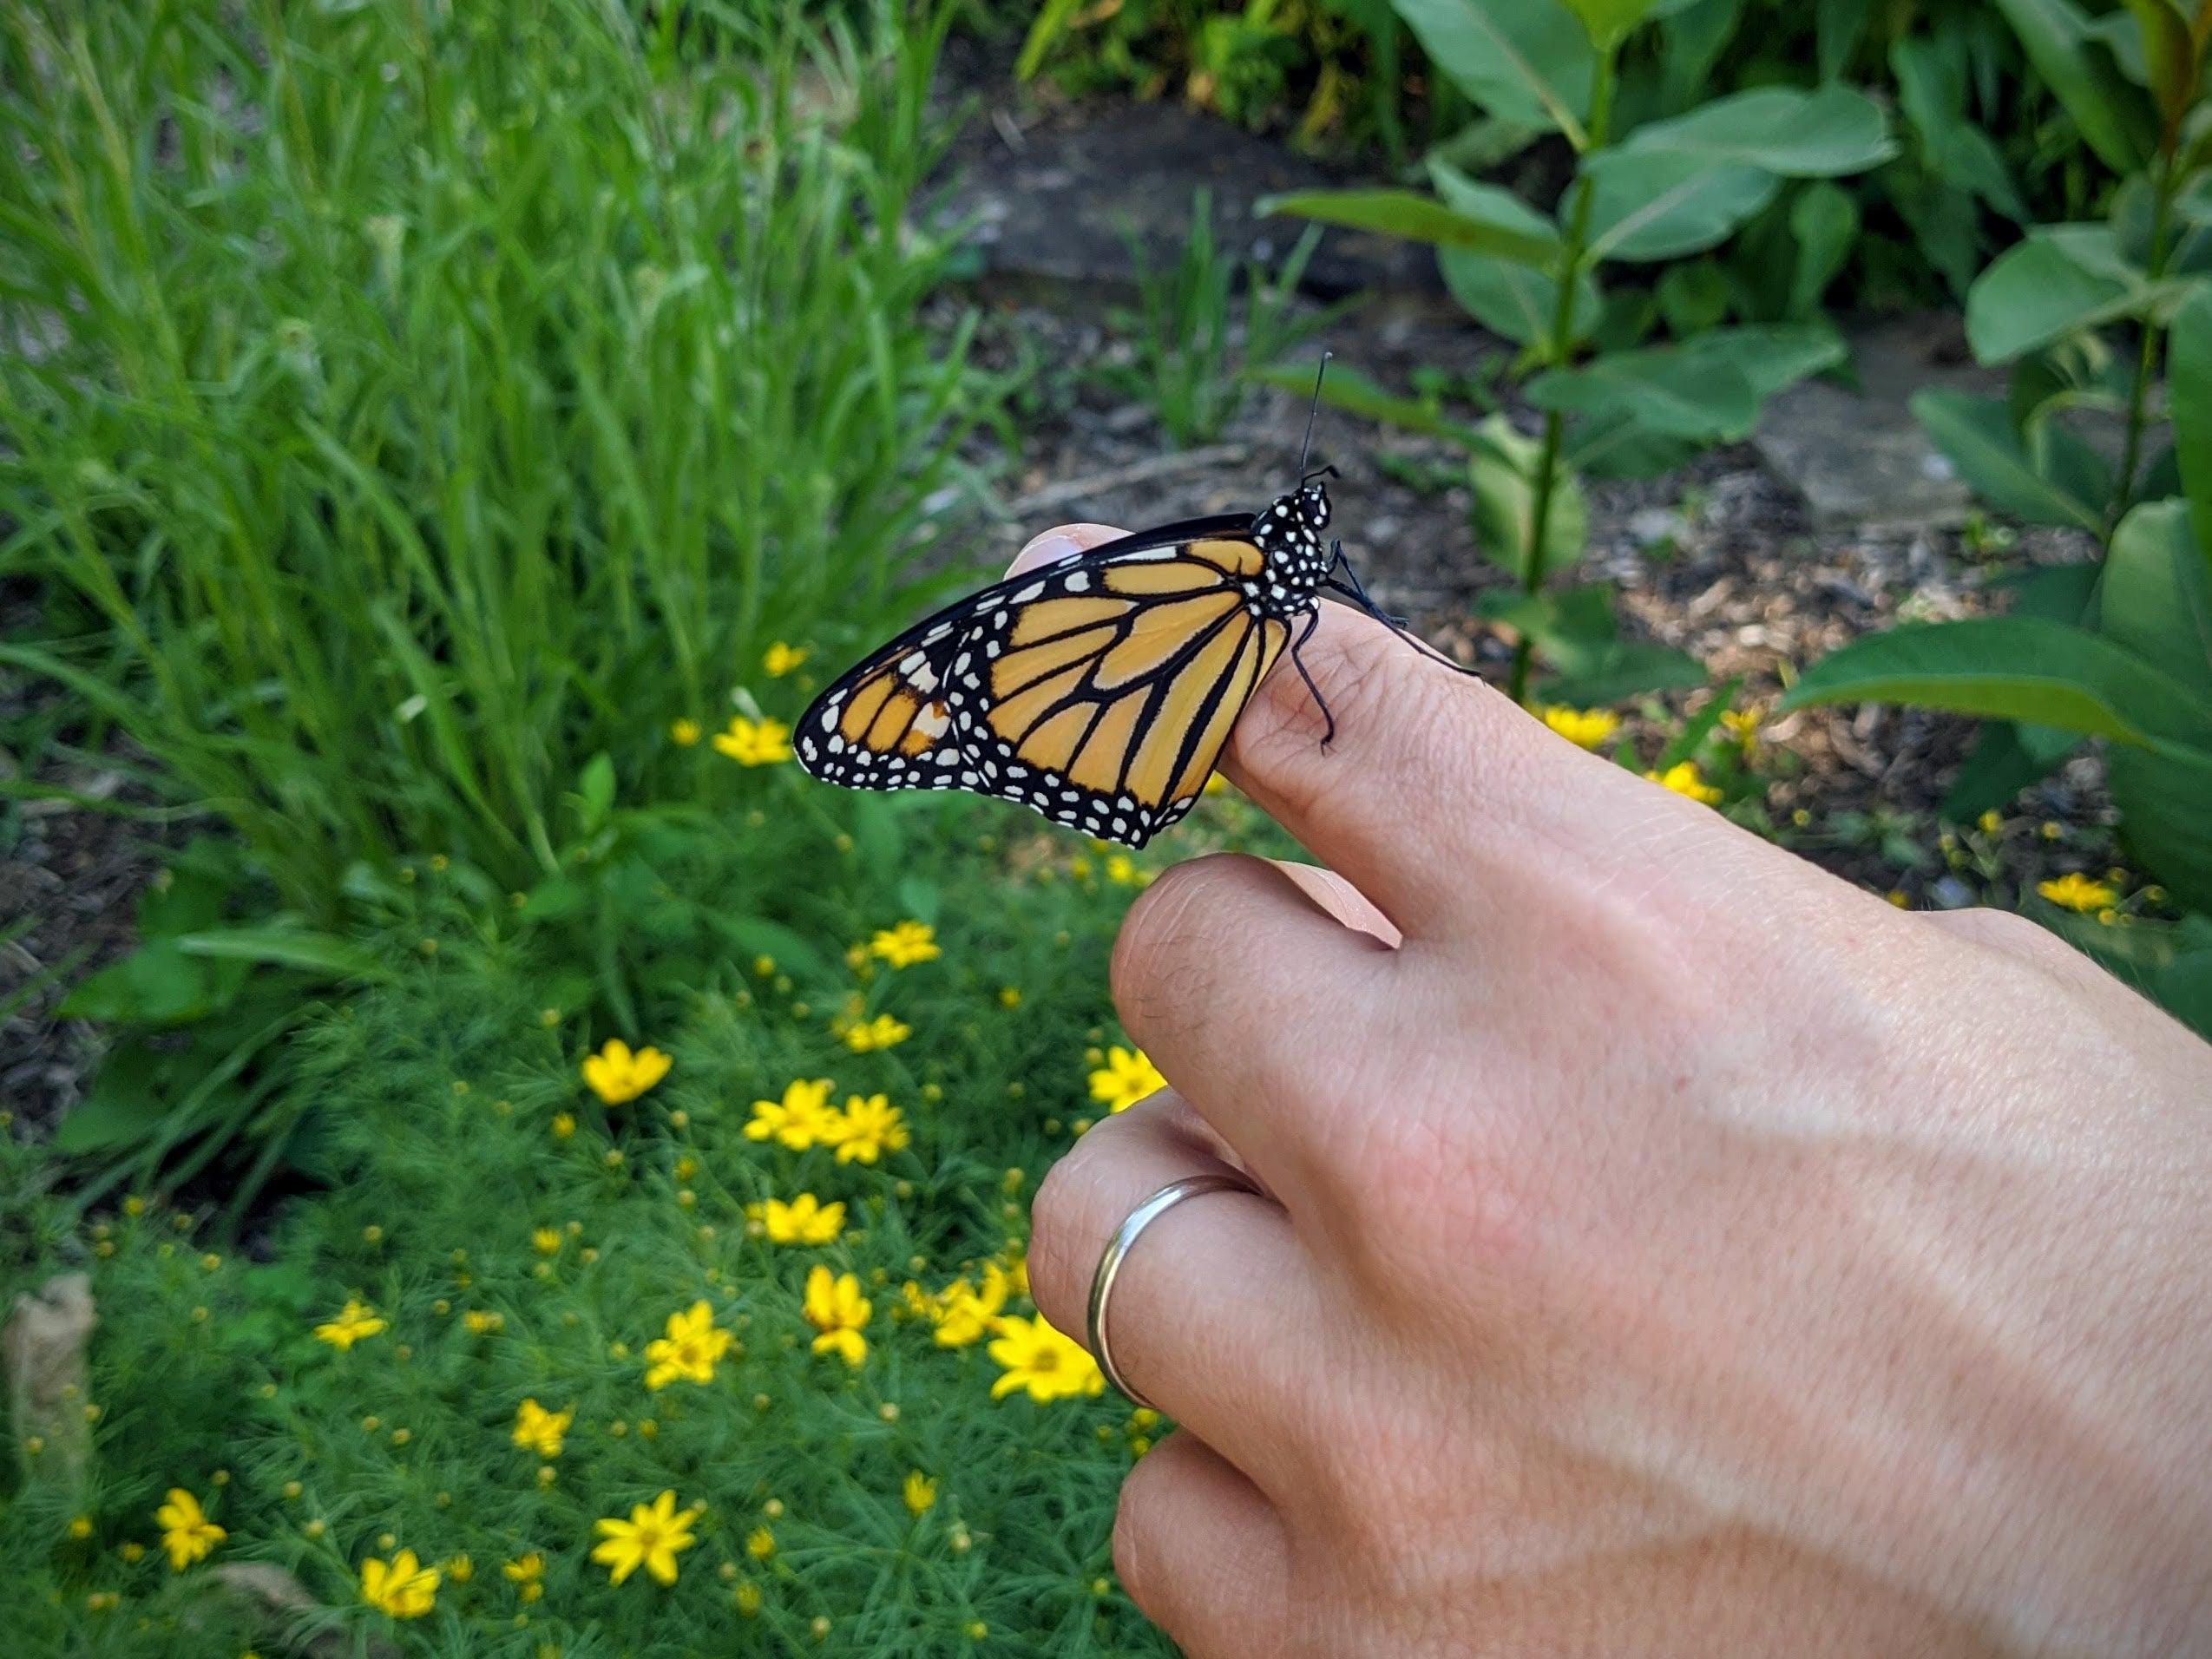 A freshly eclosed female monarch butterfly perched on a hand.